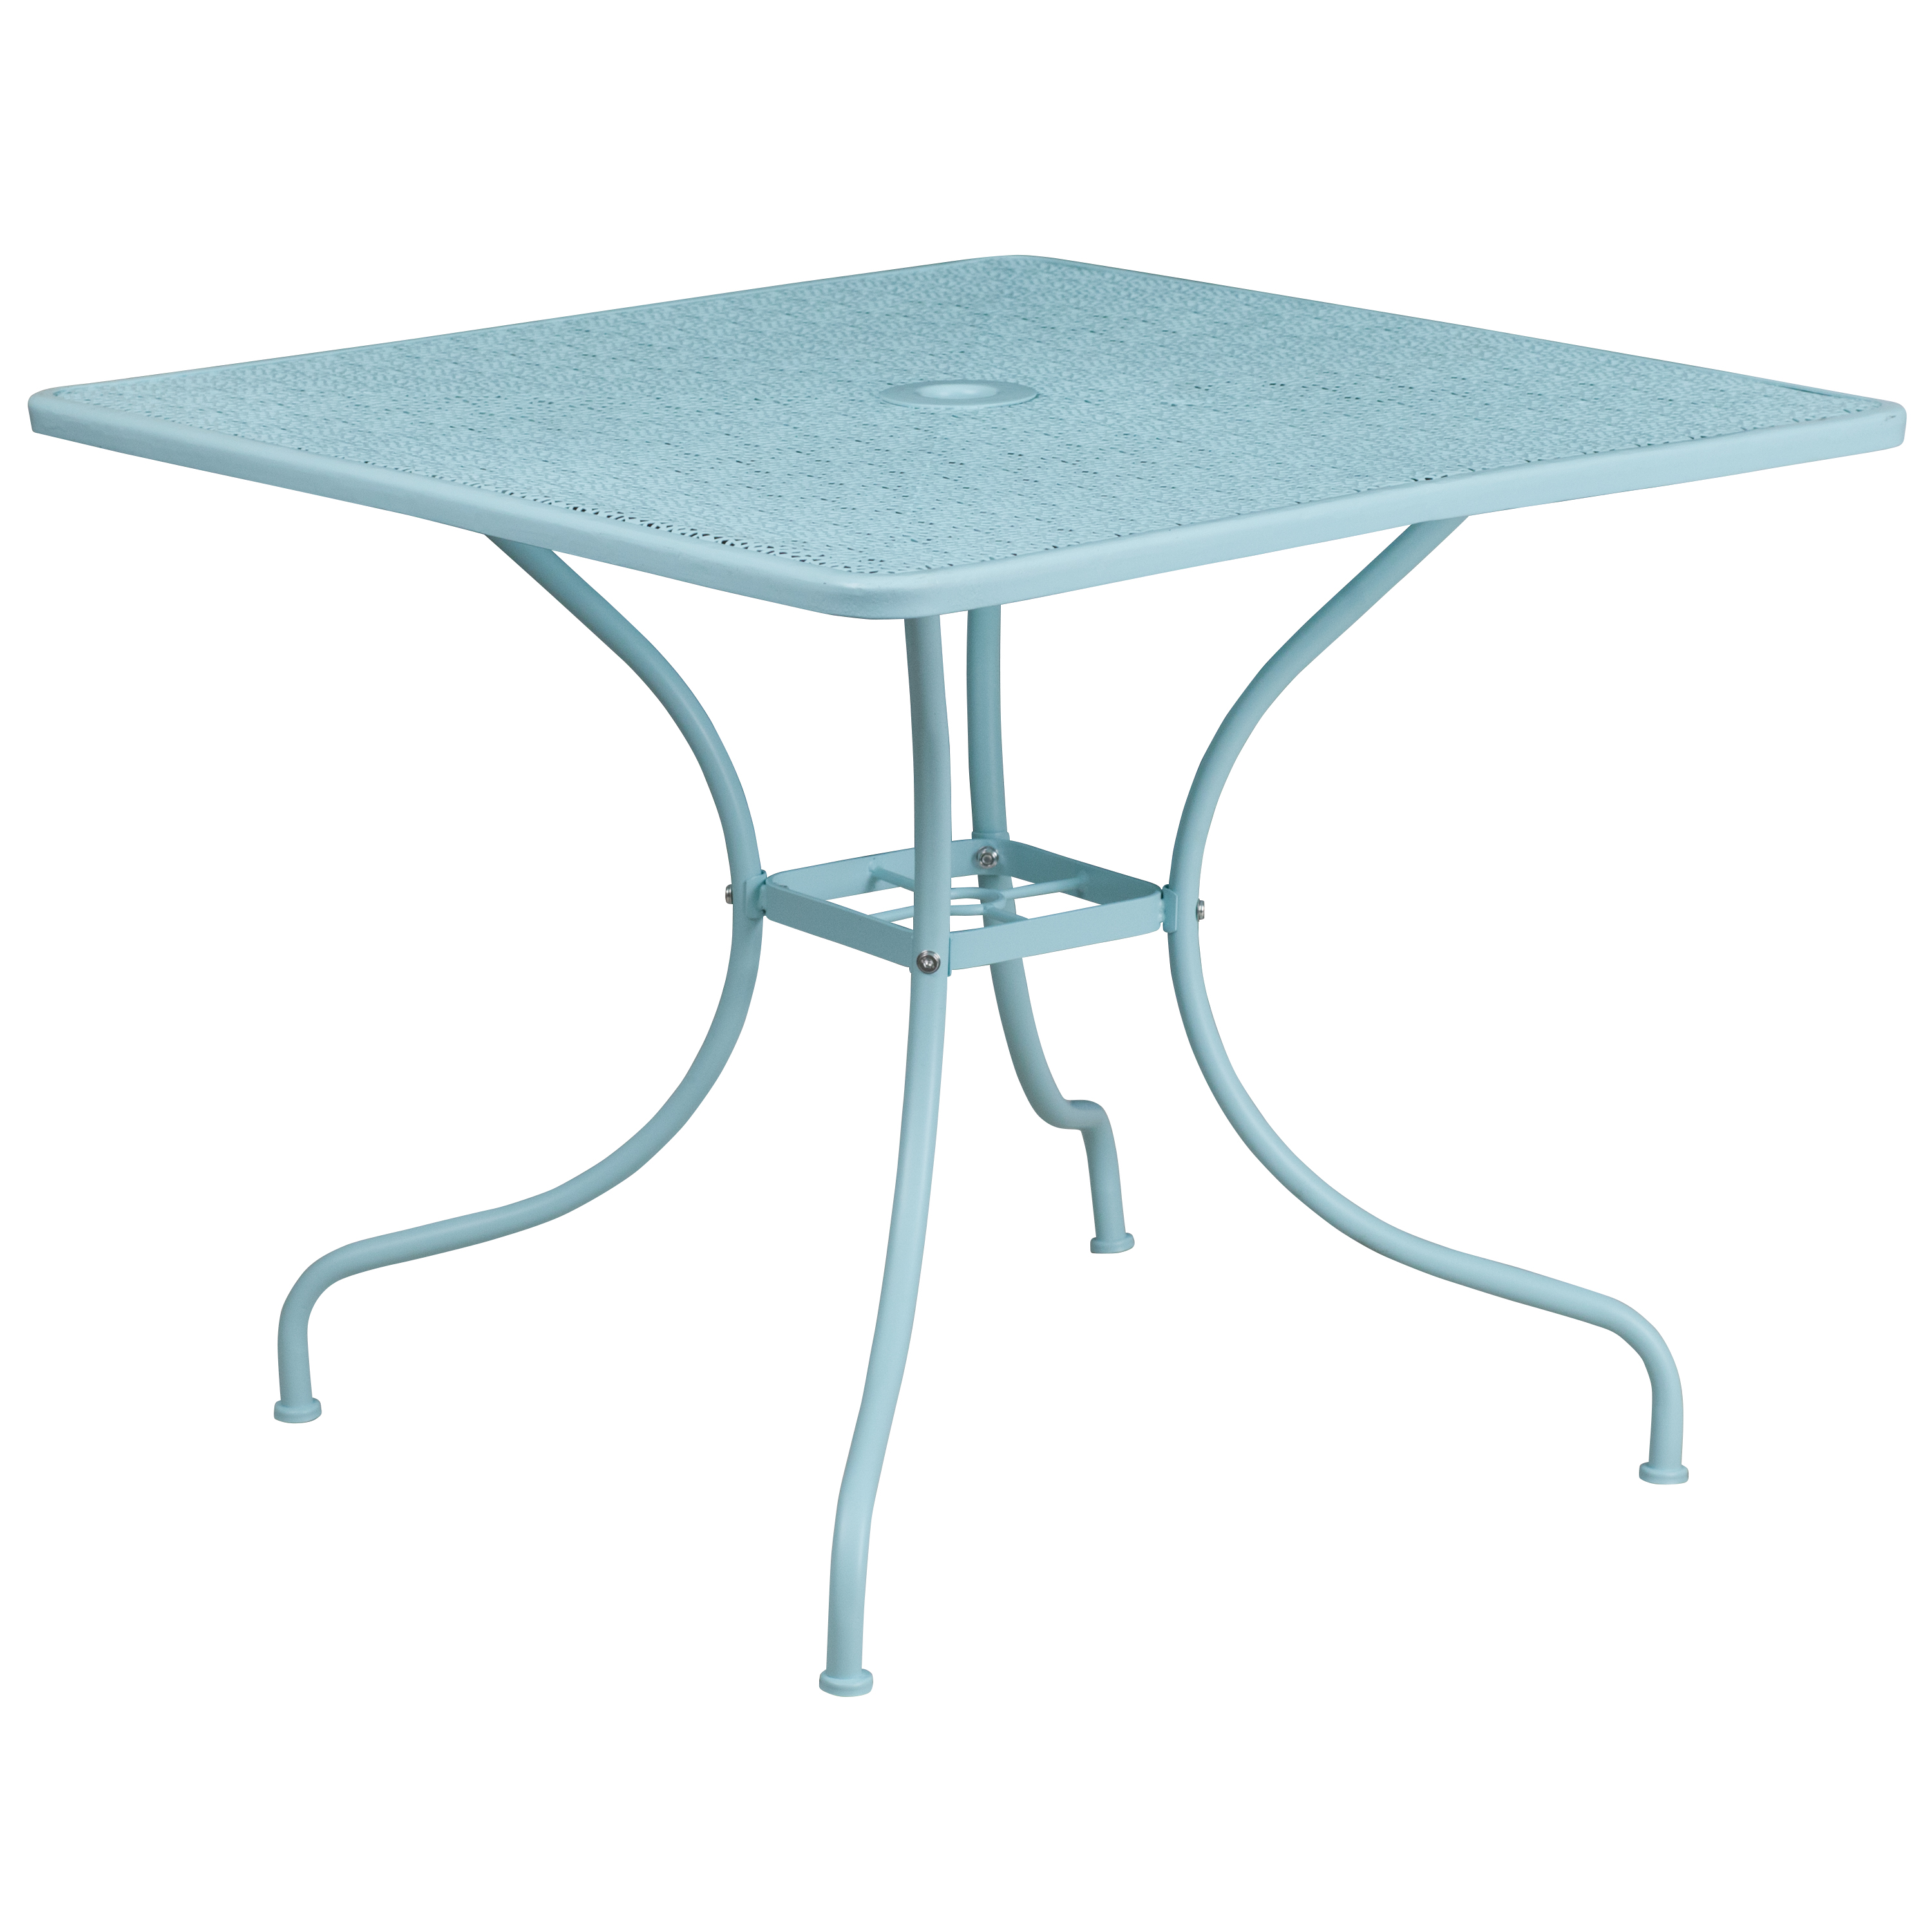 Flash Furniture Commercial Grade 35.5" Square Sky Blue Indoor-Outdoor Steel Patio Table with Umbrella Hole - image 2 of 8